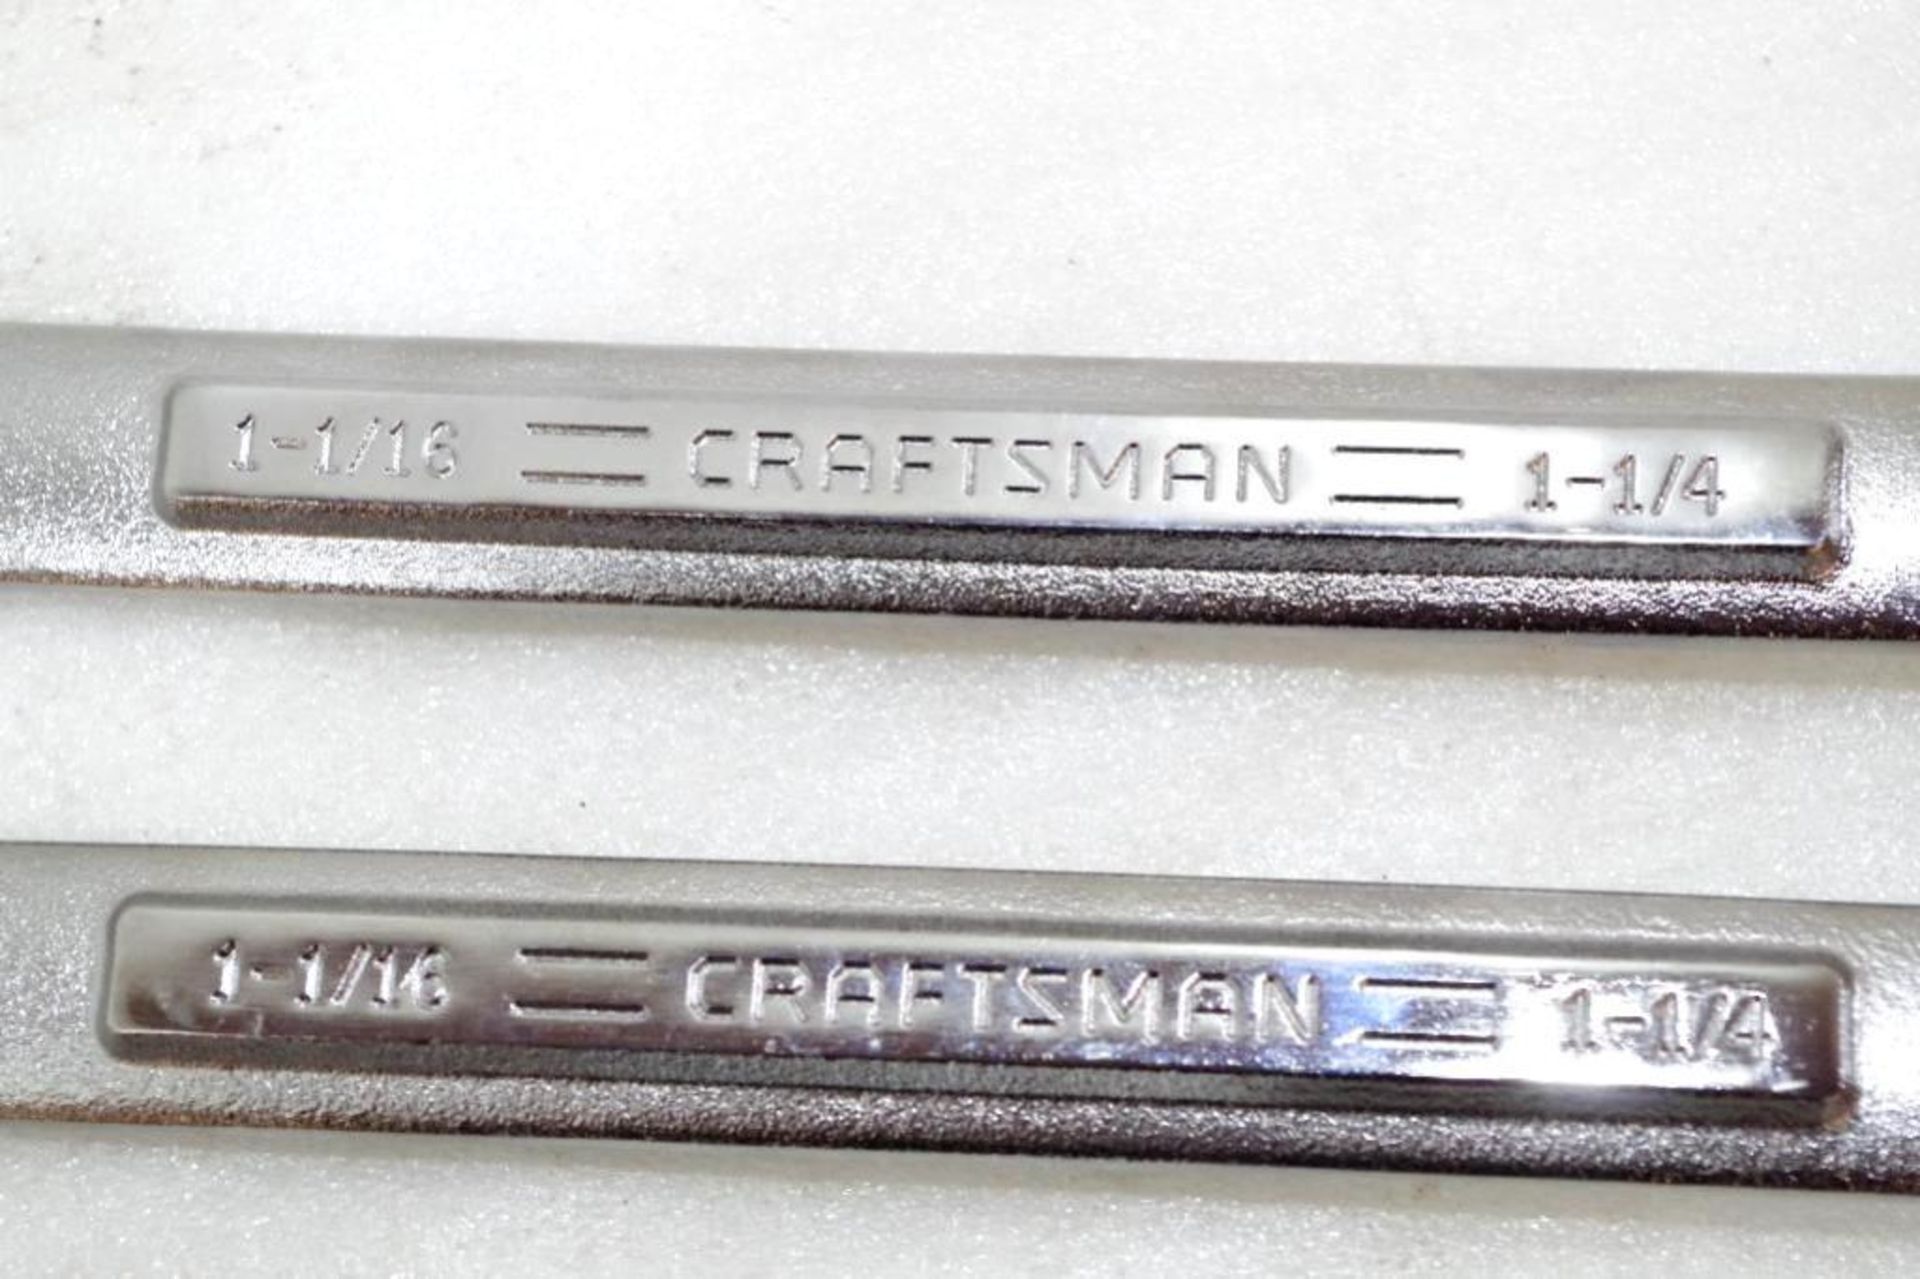 (4) NEW CRAFTSMAN Box-End Wrenches, Forged in USA - Image 2 of 4